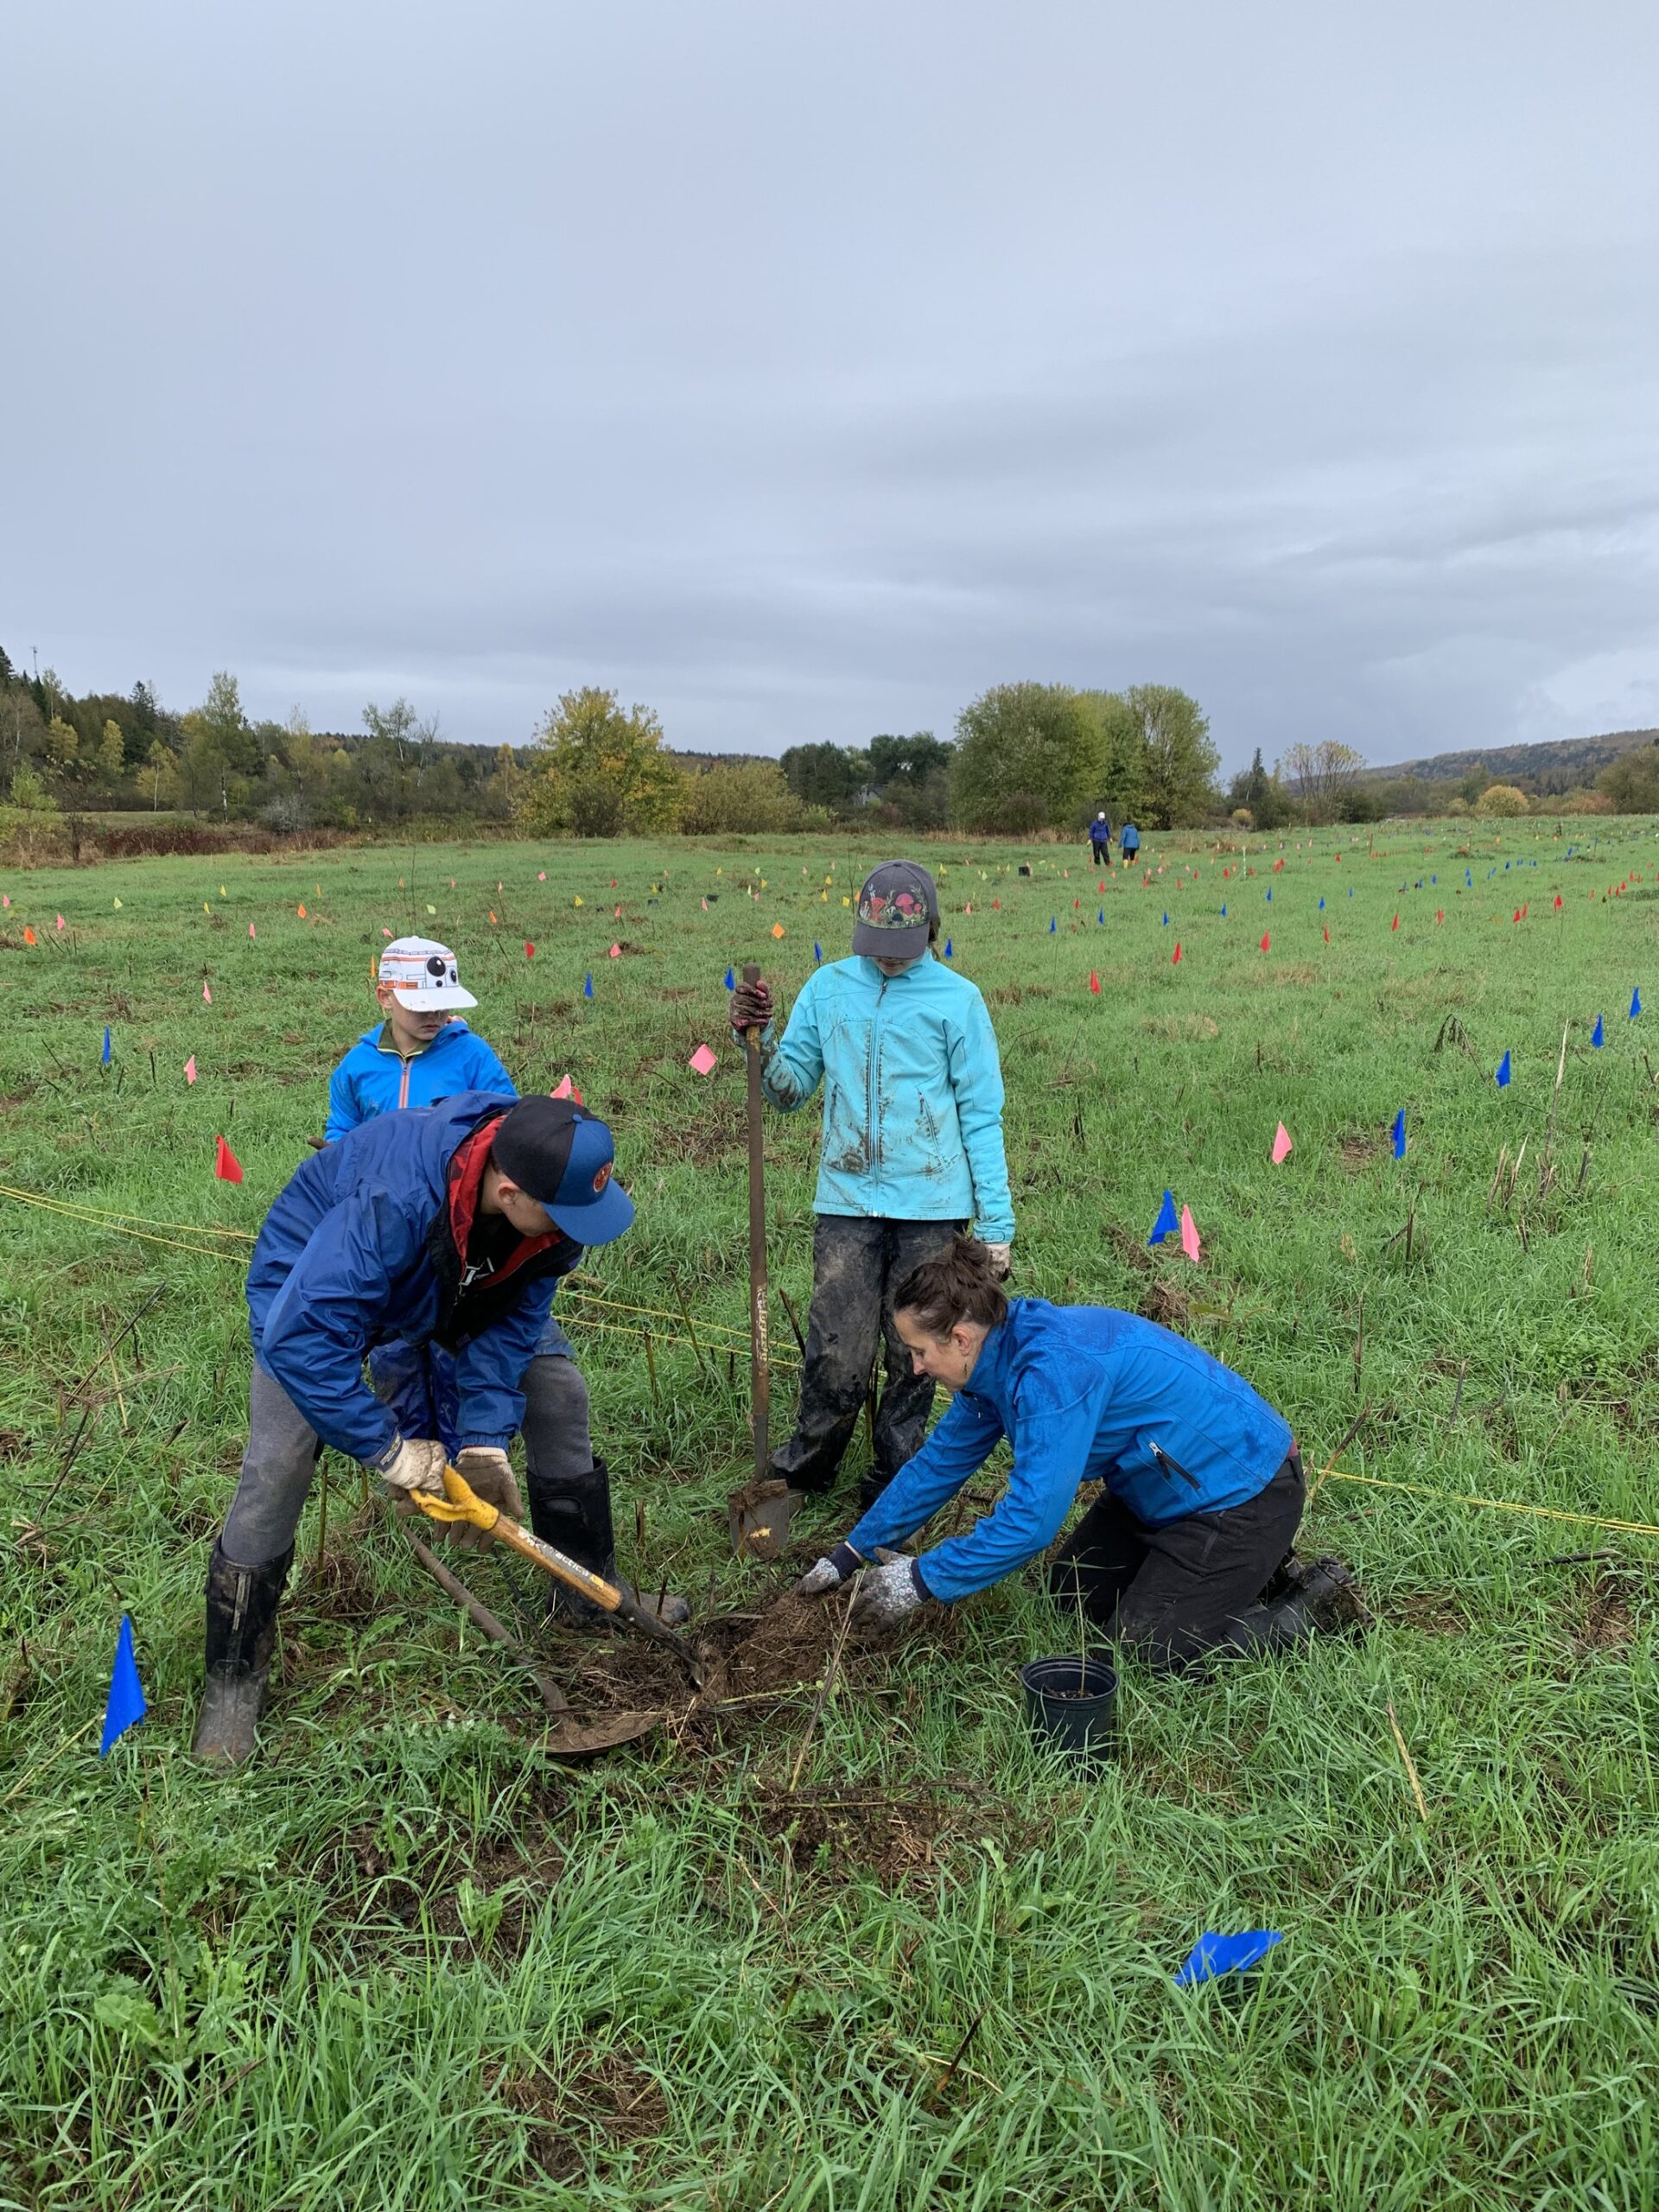 Two adults digging a hole in a field to plant a tree as two children watch. Several colored flags litter the field to mark areas to be planted in and which species